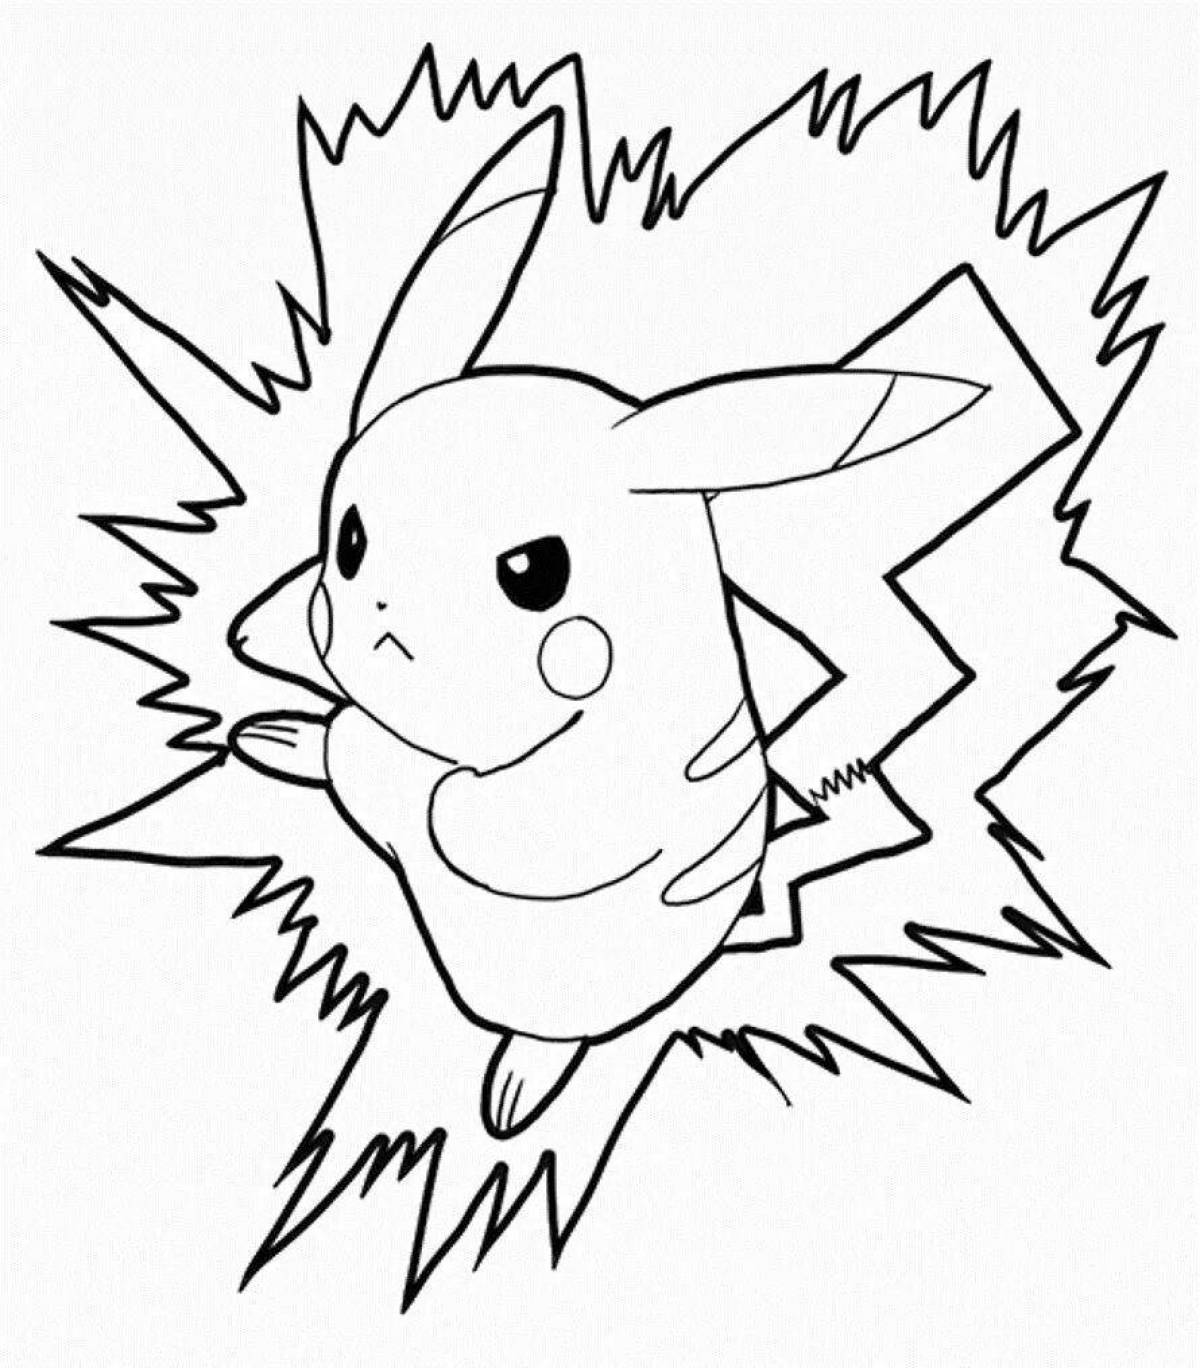 Colorful pikachu coloring page